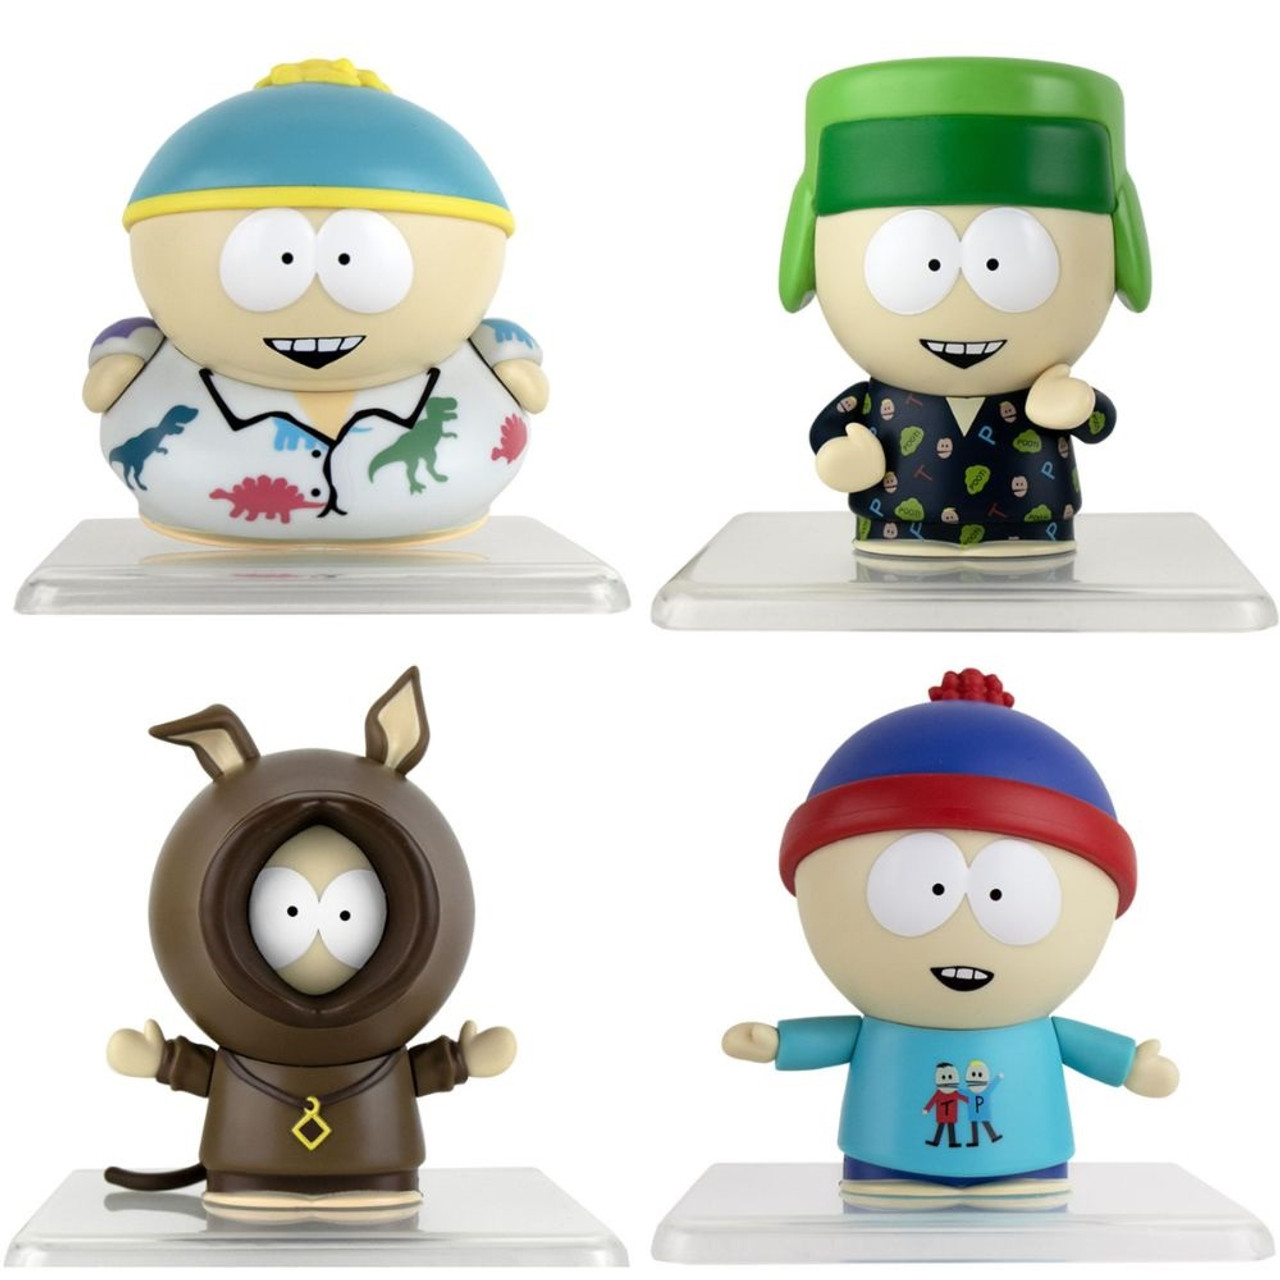 South Park Articulated Action Figures in Festive PJs 